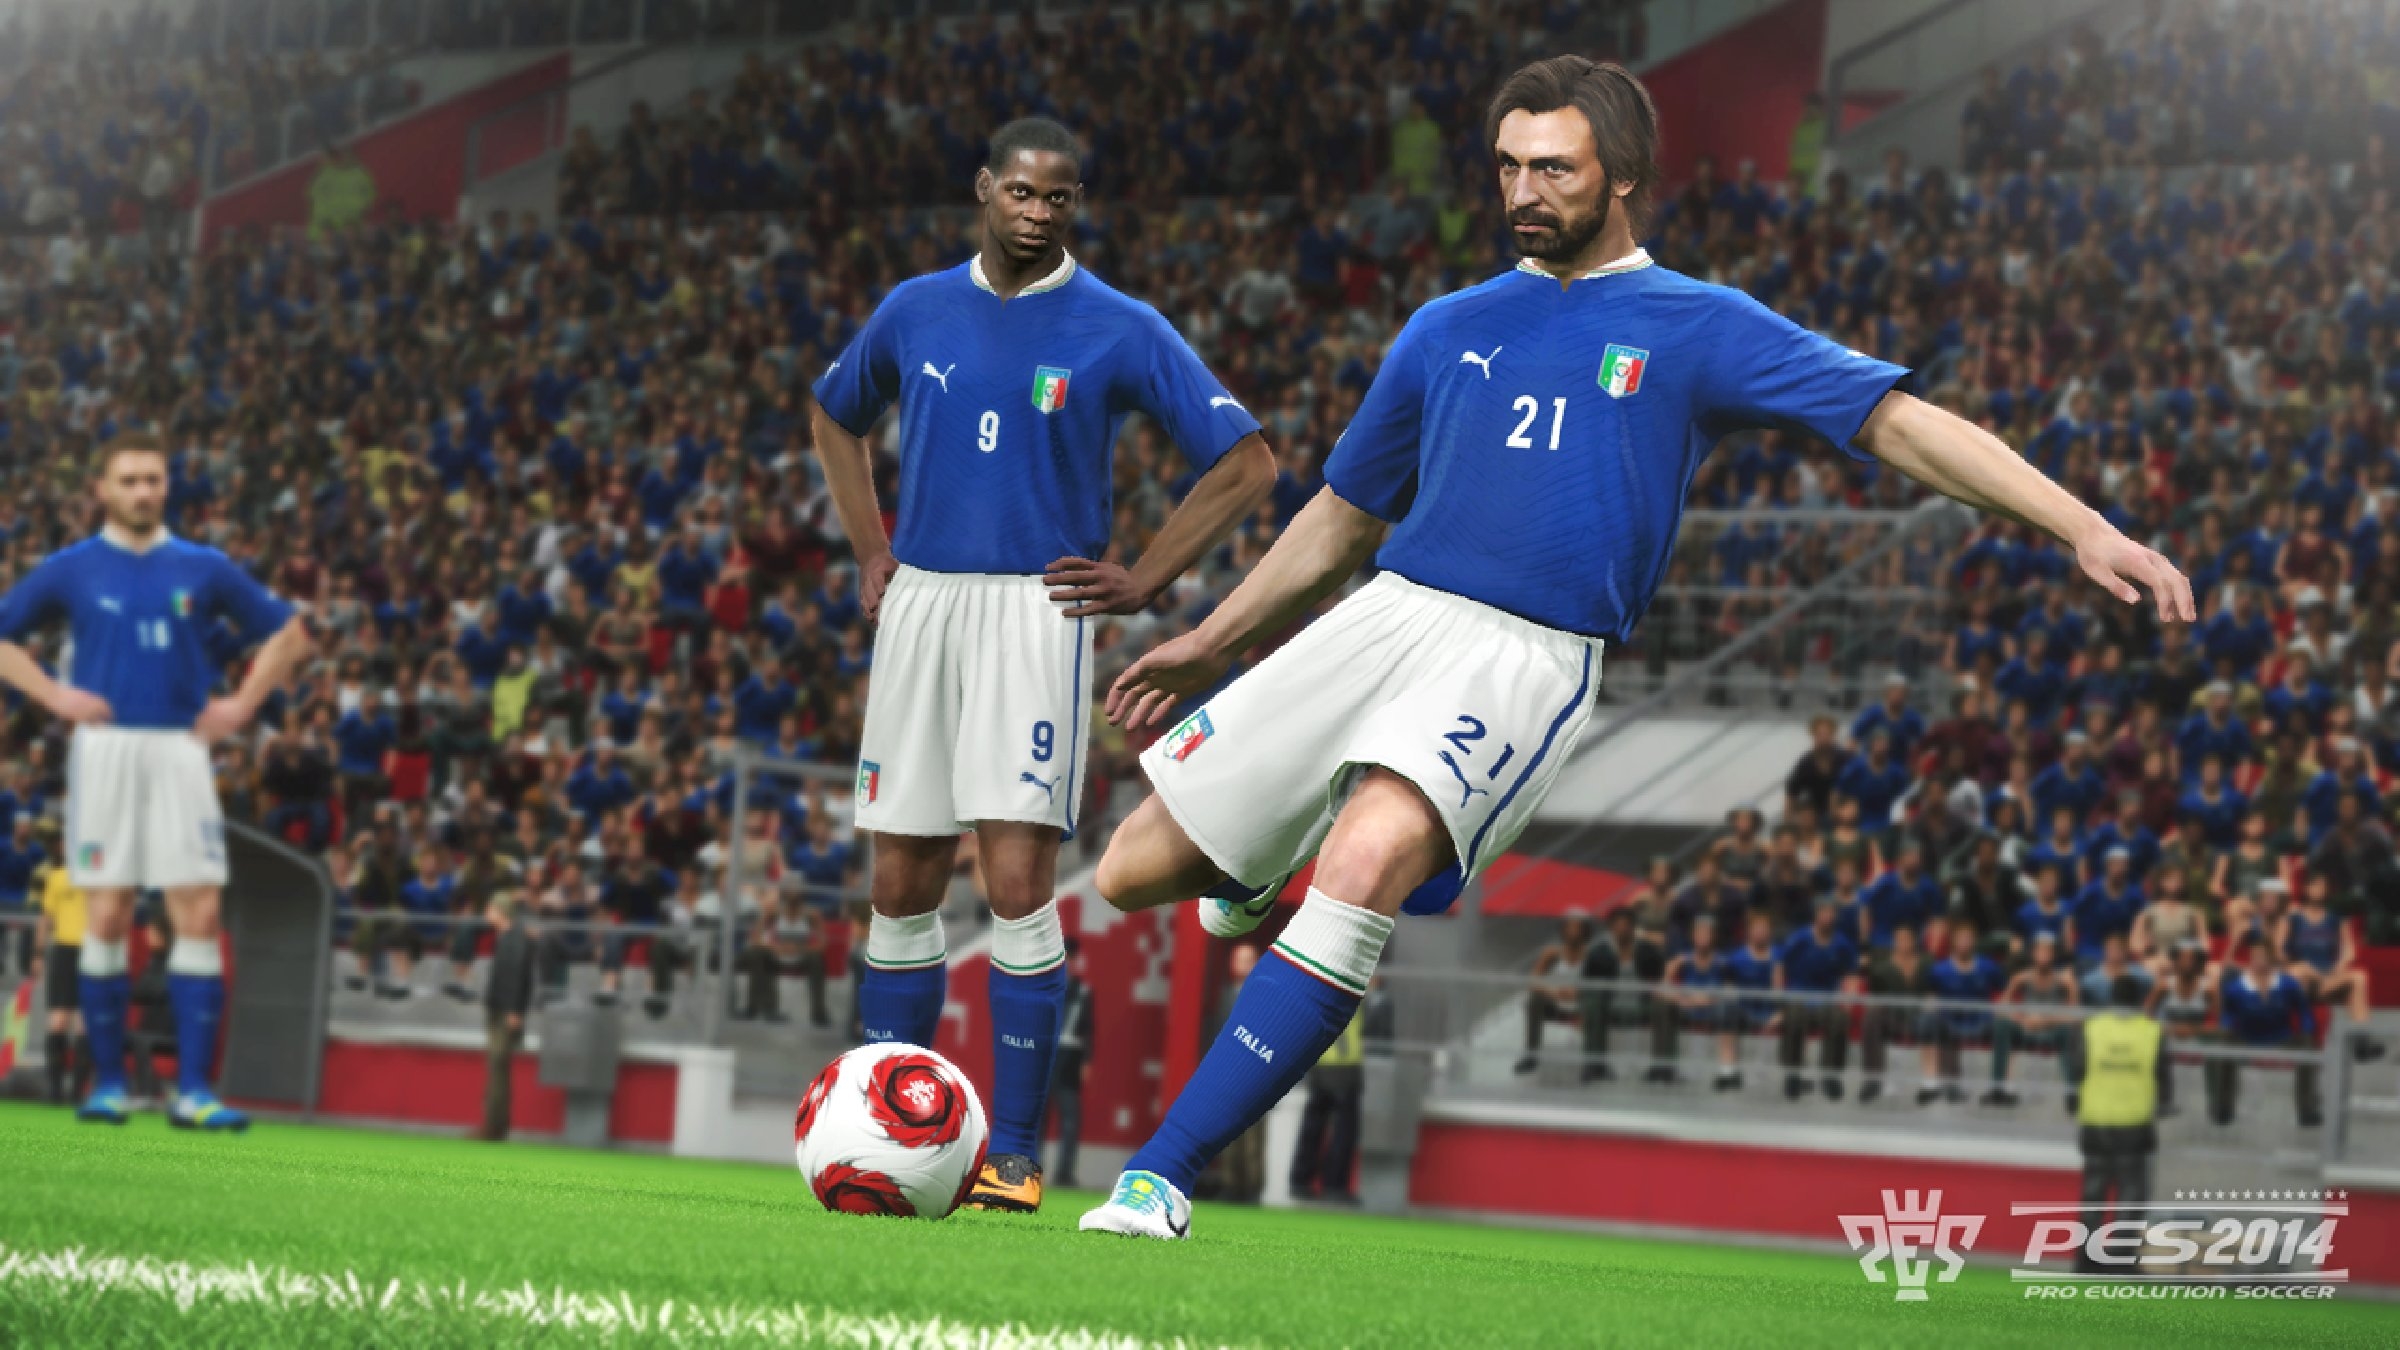 Freekick On PES 2014 The Sport Game HD Wallpaper Image Picture